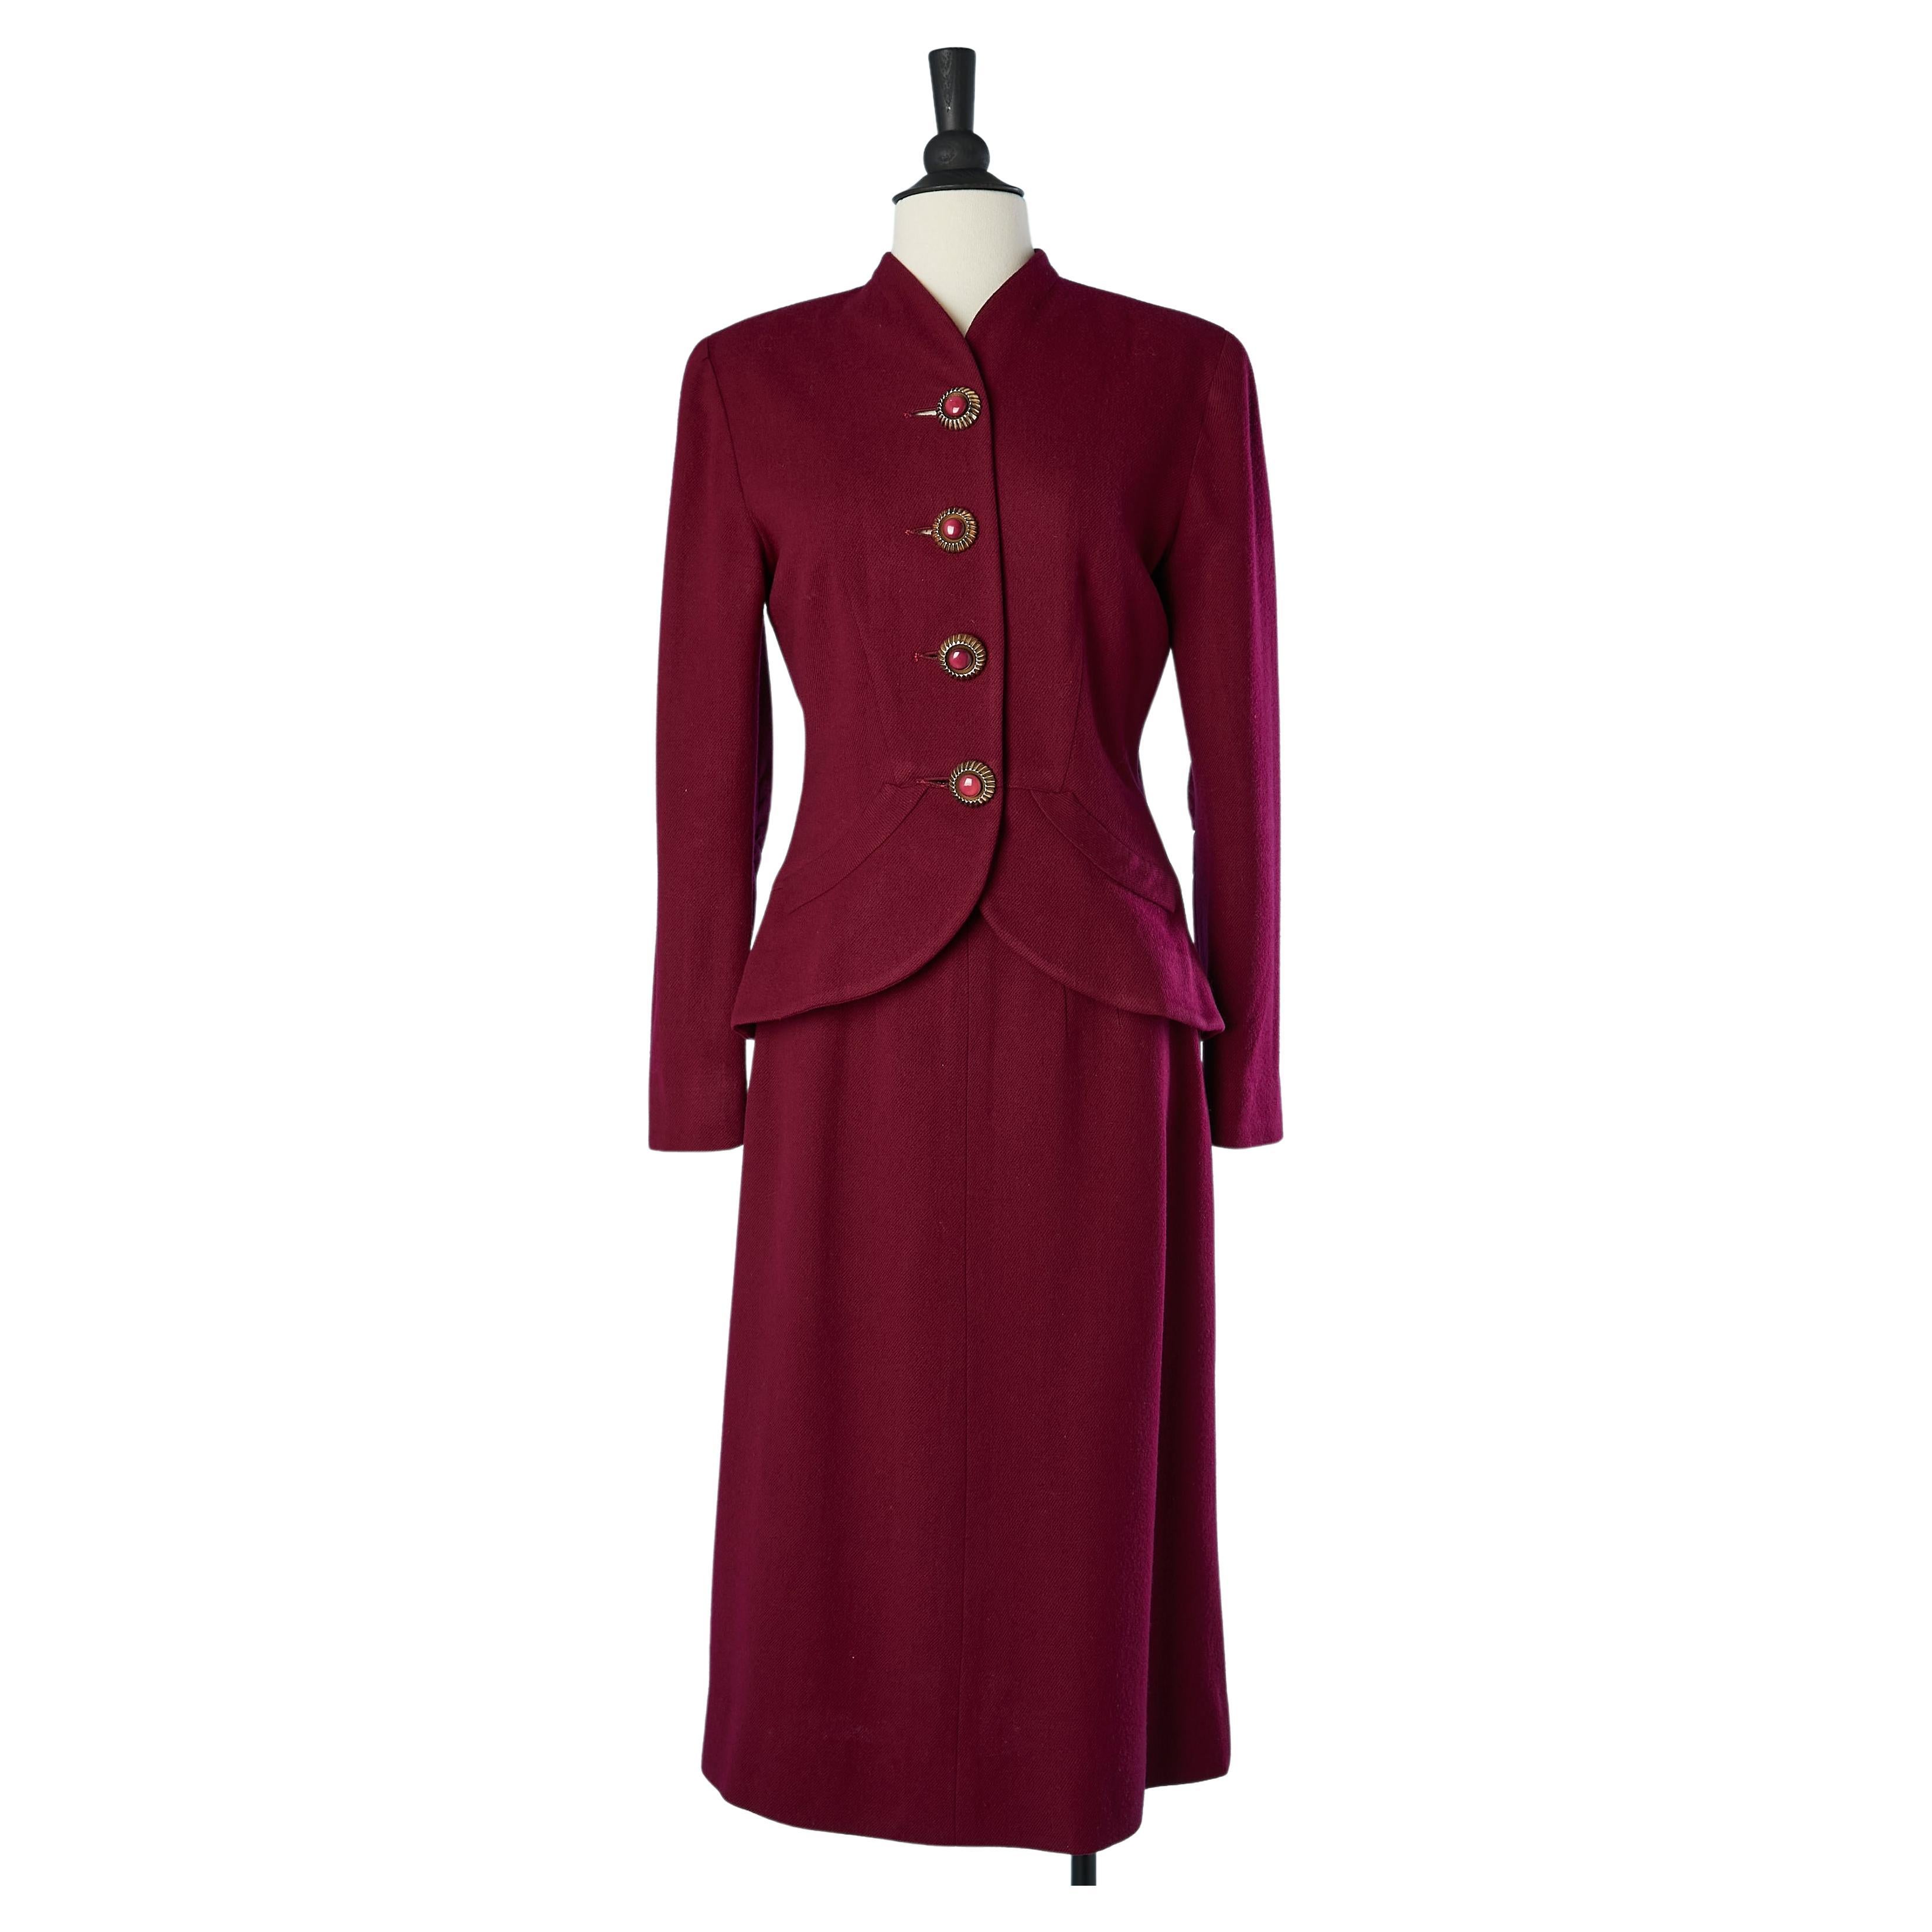 Burgundy skirt-suit in wool with jewellery buttons Circa 1940/50 For Sale